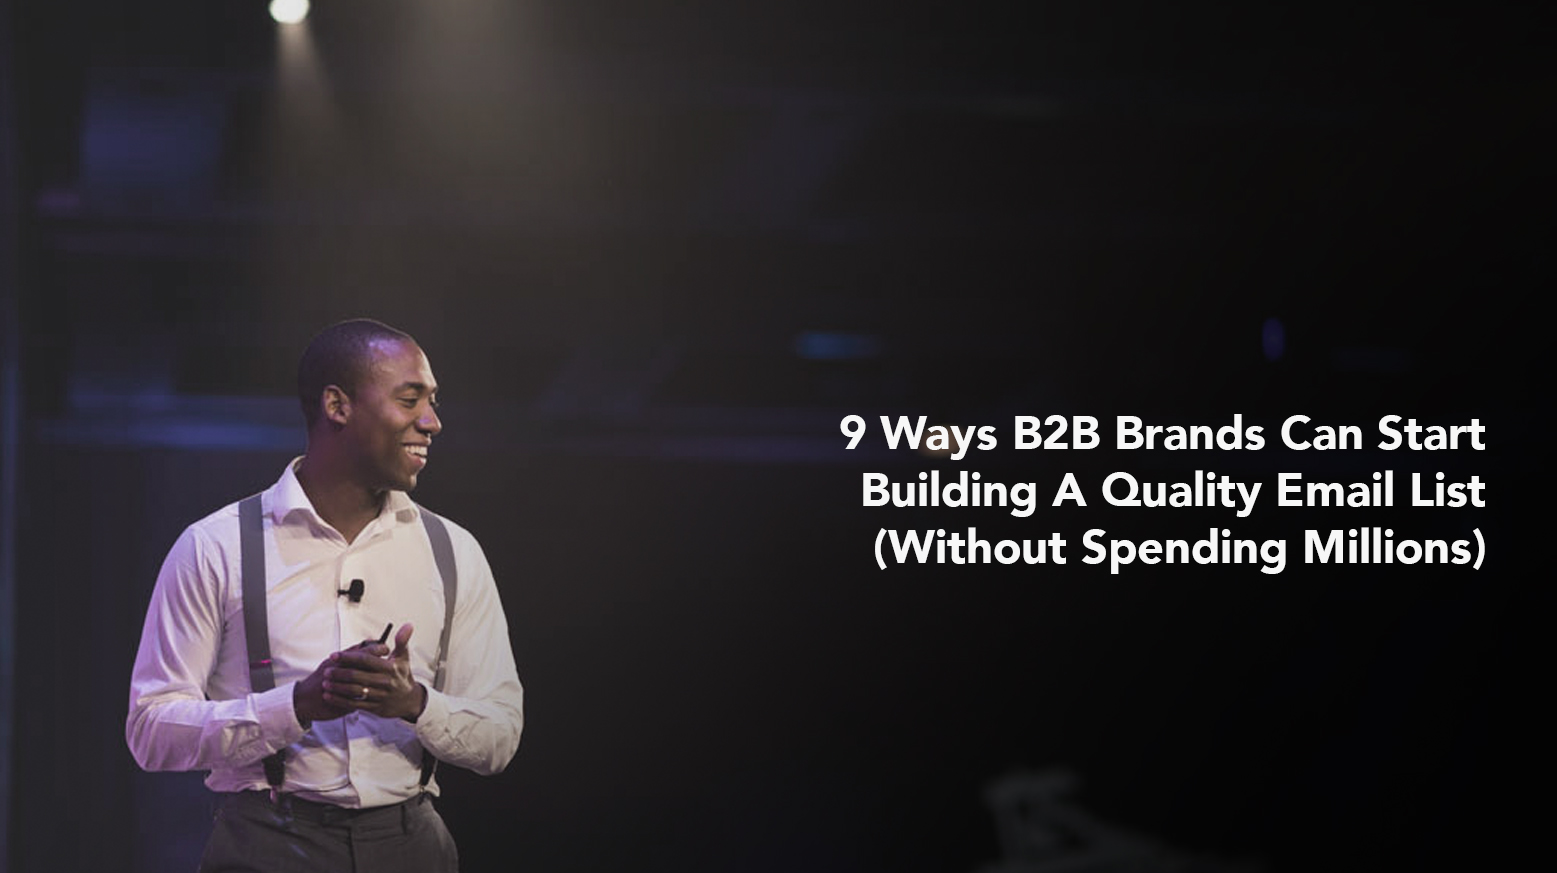 9 Ways B2B Brands Can Start Building An Email List (Without Spending Millions)